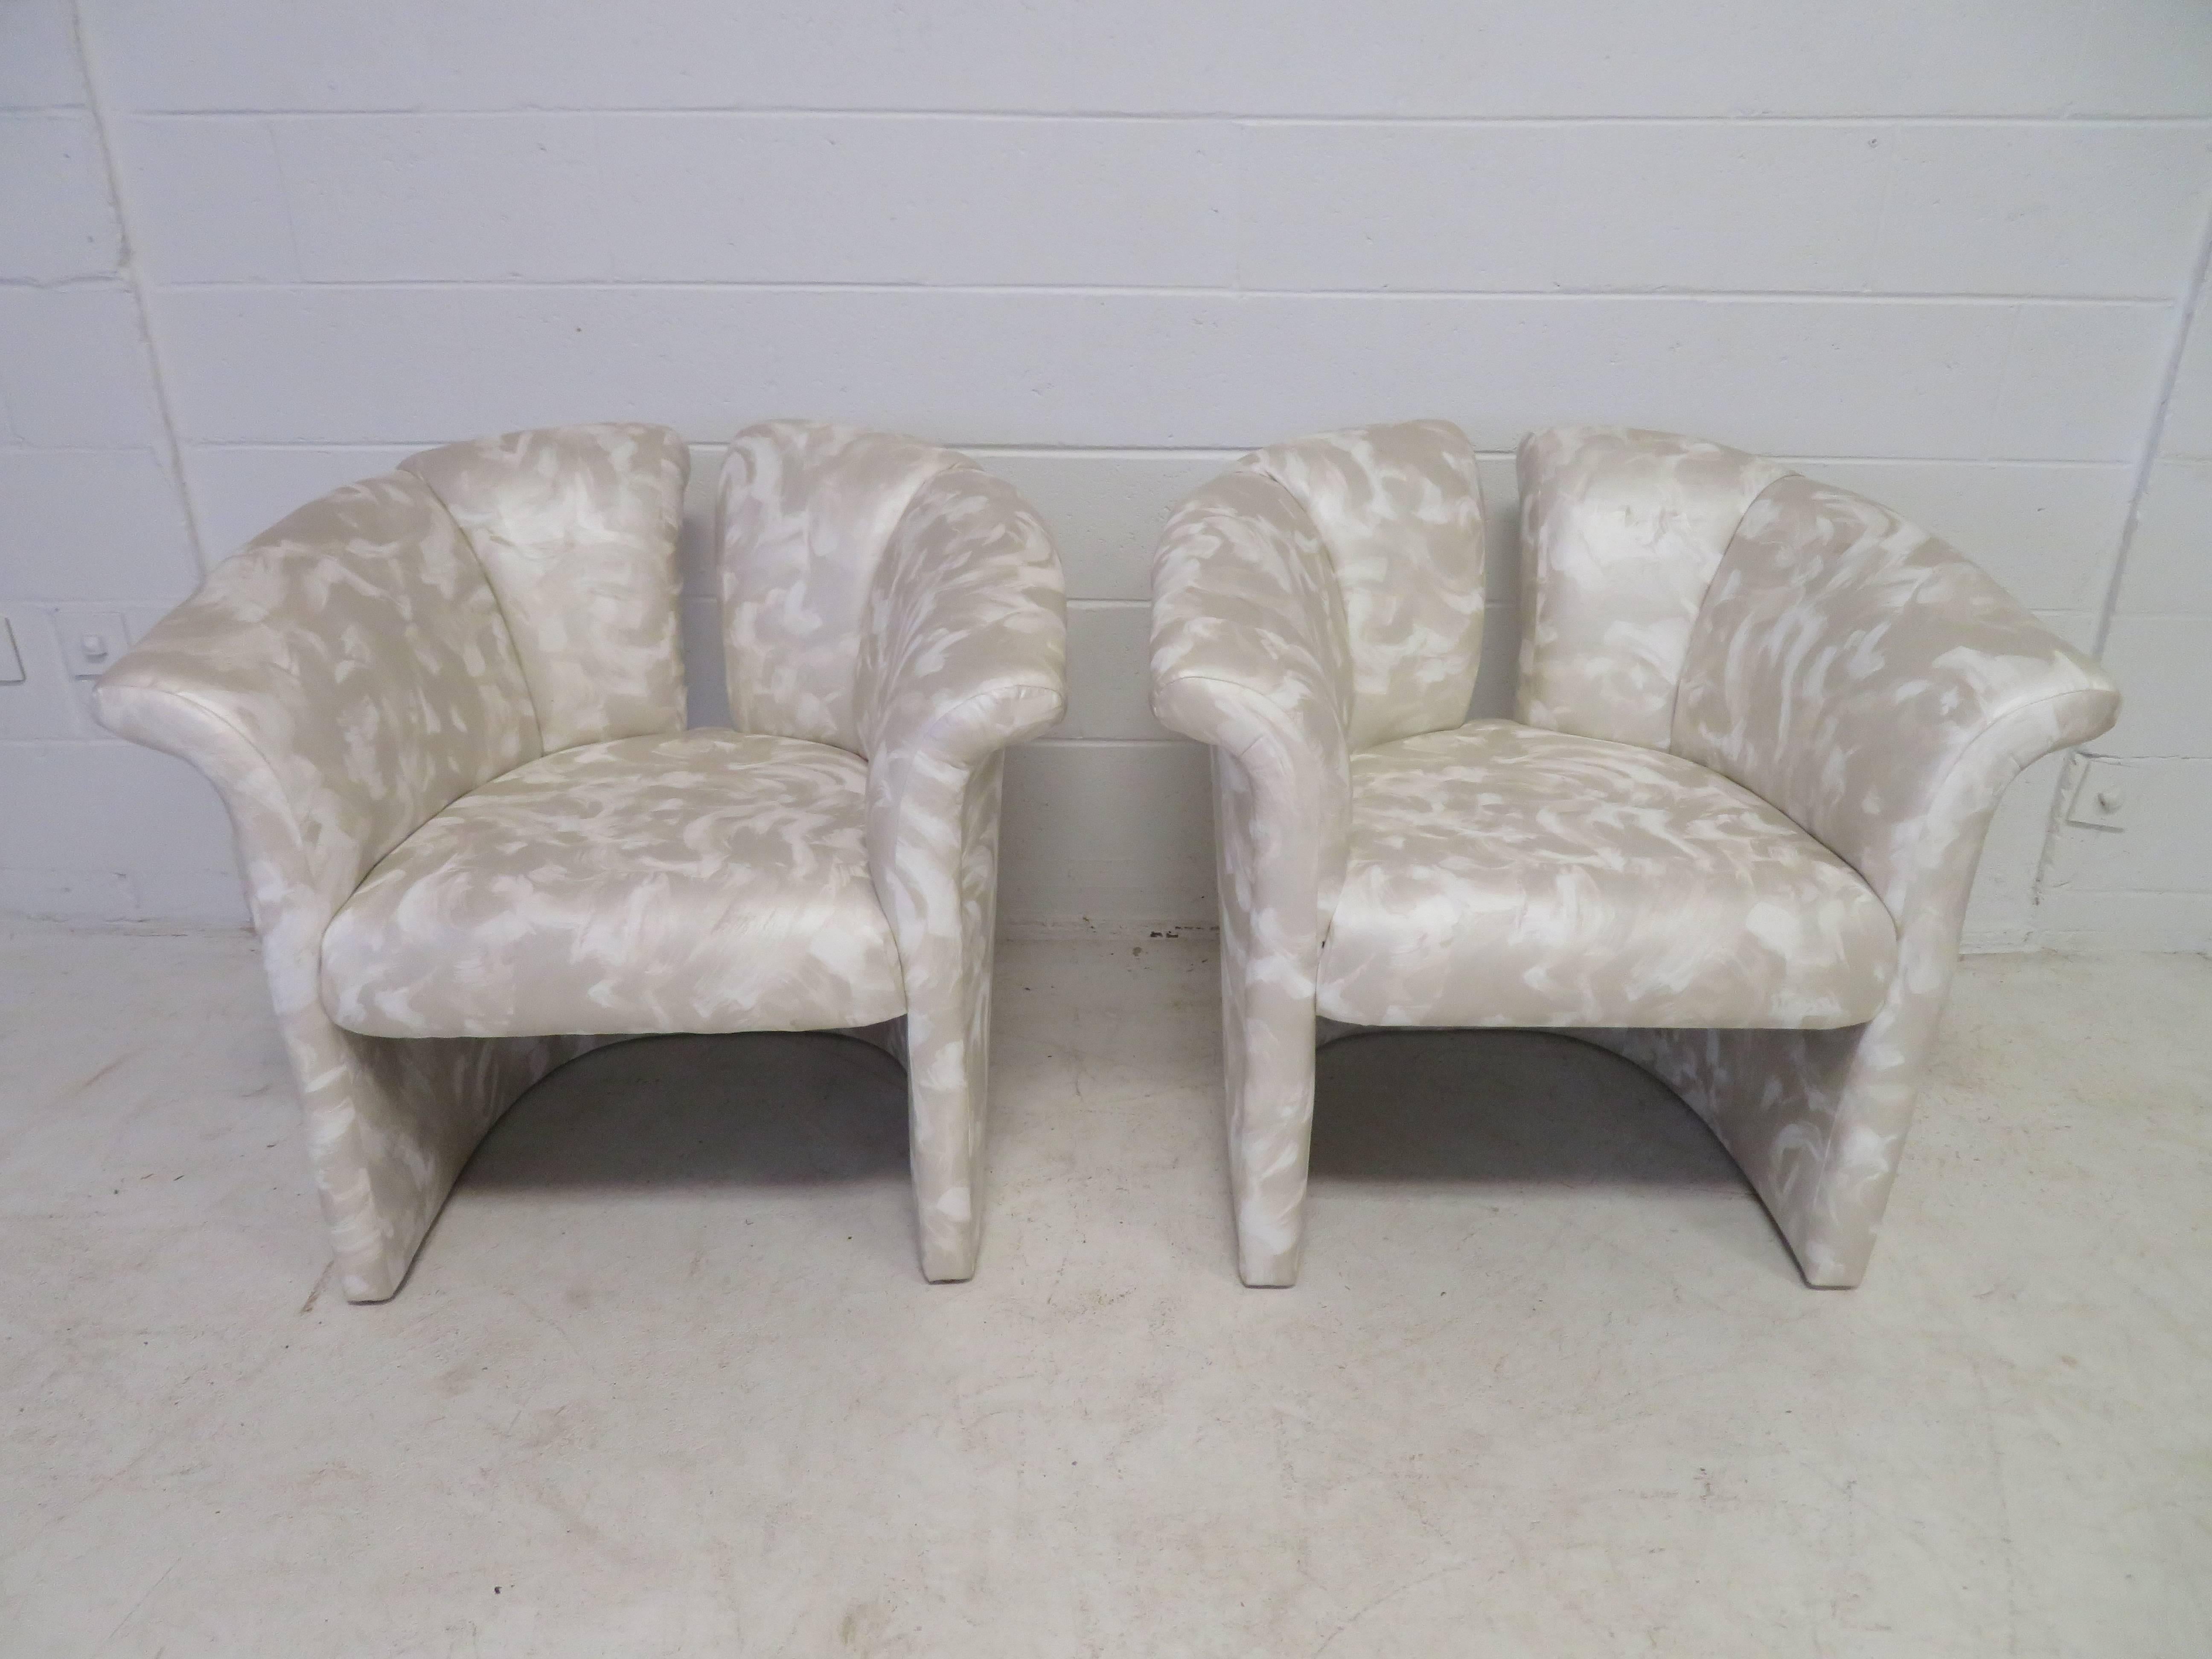 Late 20th Century Pair of Signed Milo Baughman Barrel Back Lounge Chairs, Mid-Century Modern